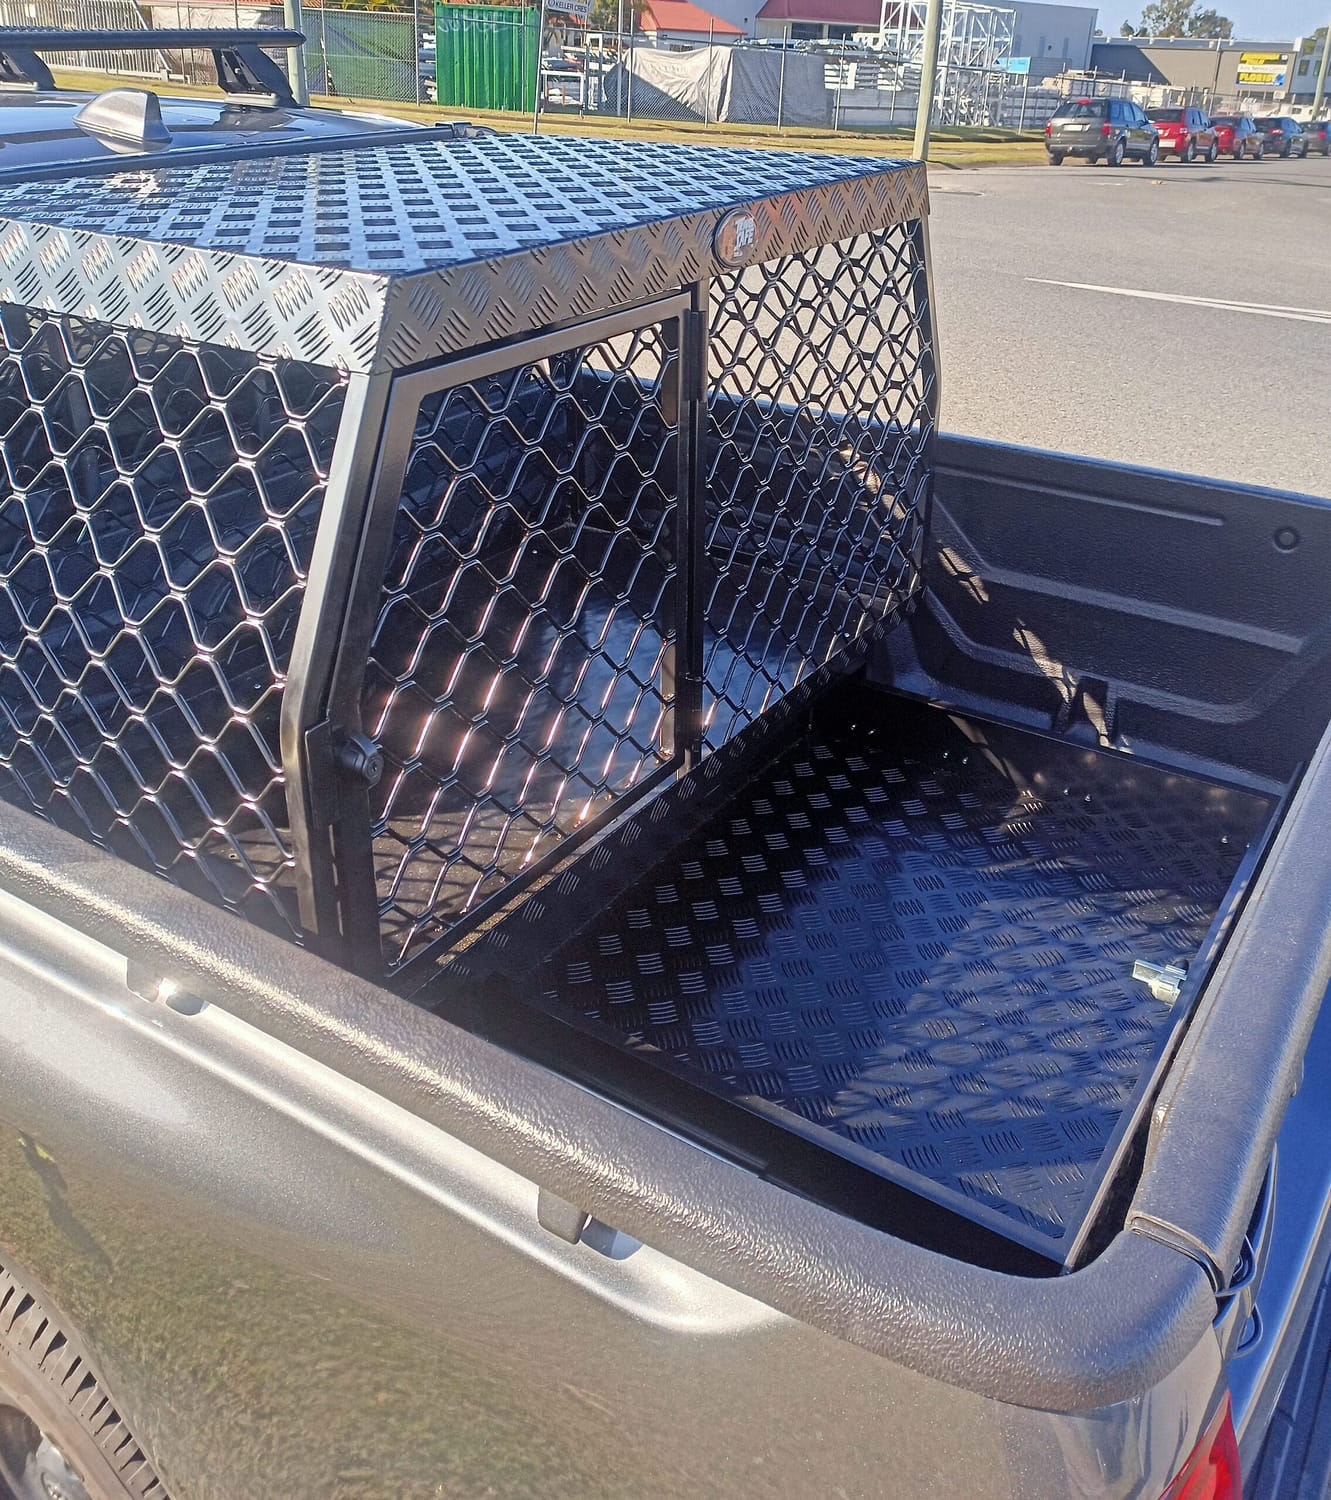 Bulldog model dog cage with a draw installed under the cage